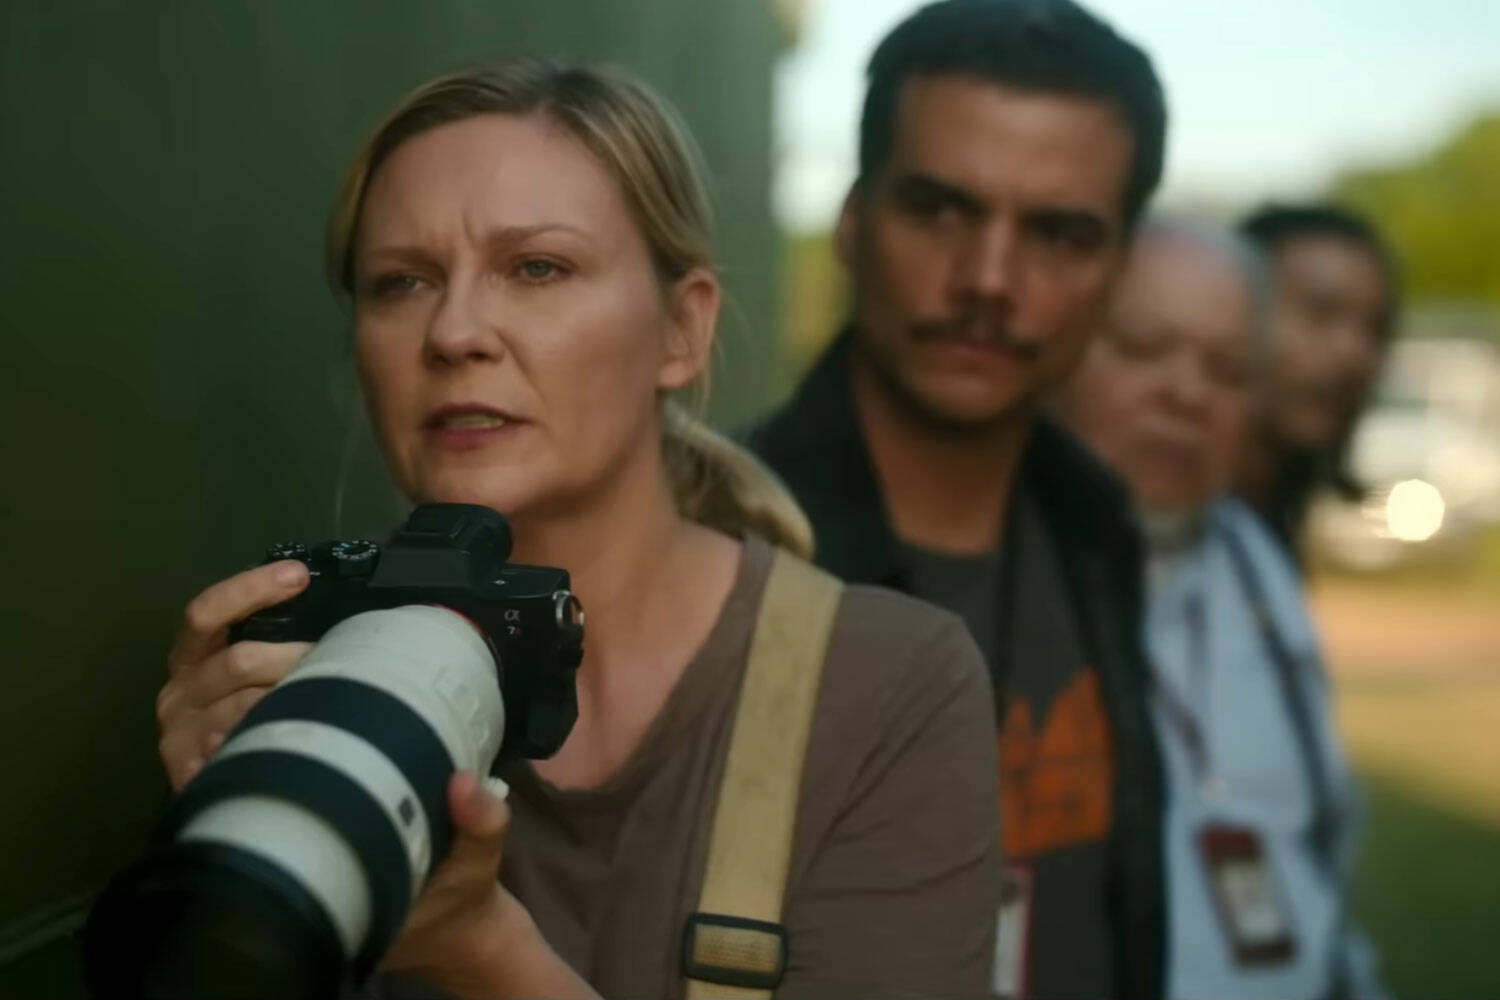 Kirsten Dunst, Wagner Moura and Stephen McKinley Henderson appear in “Civil War.” (Promotional photo courtesy A24)